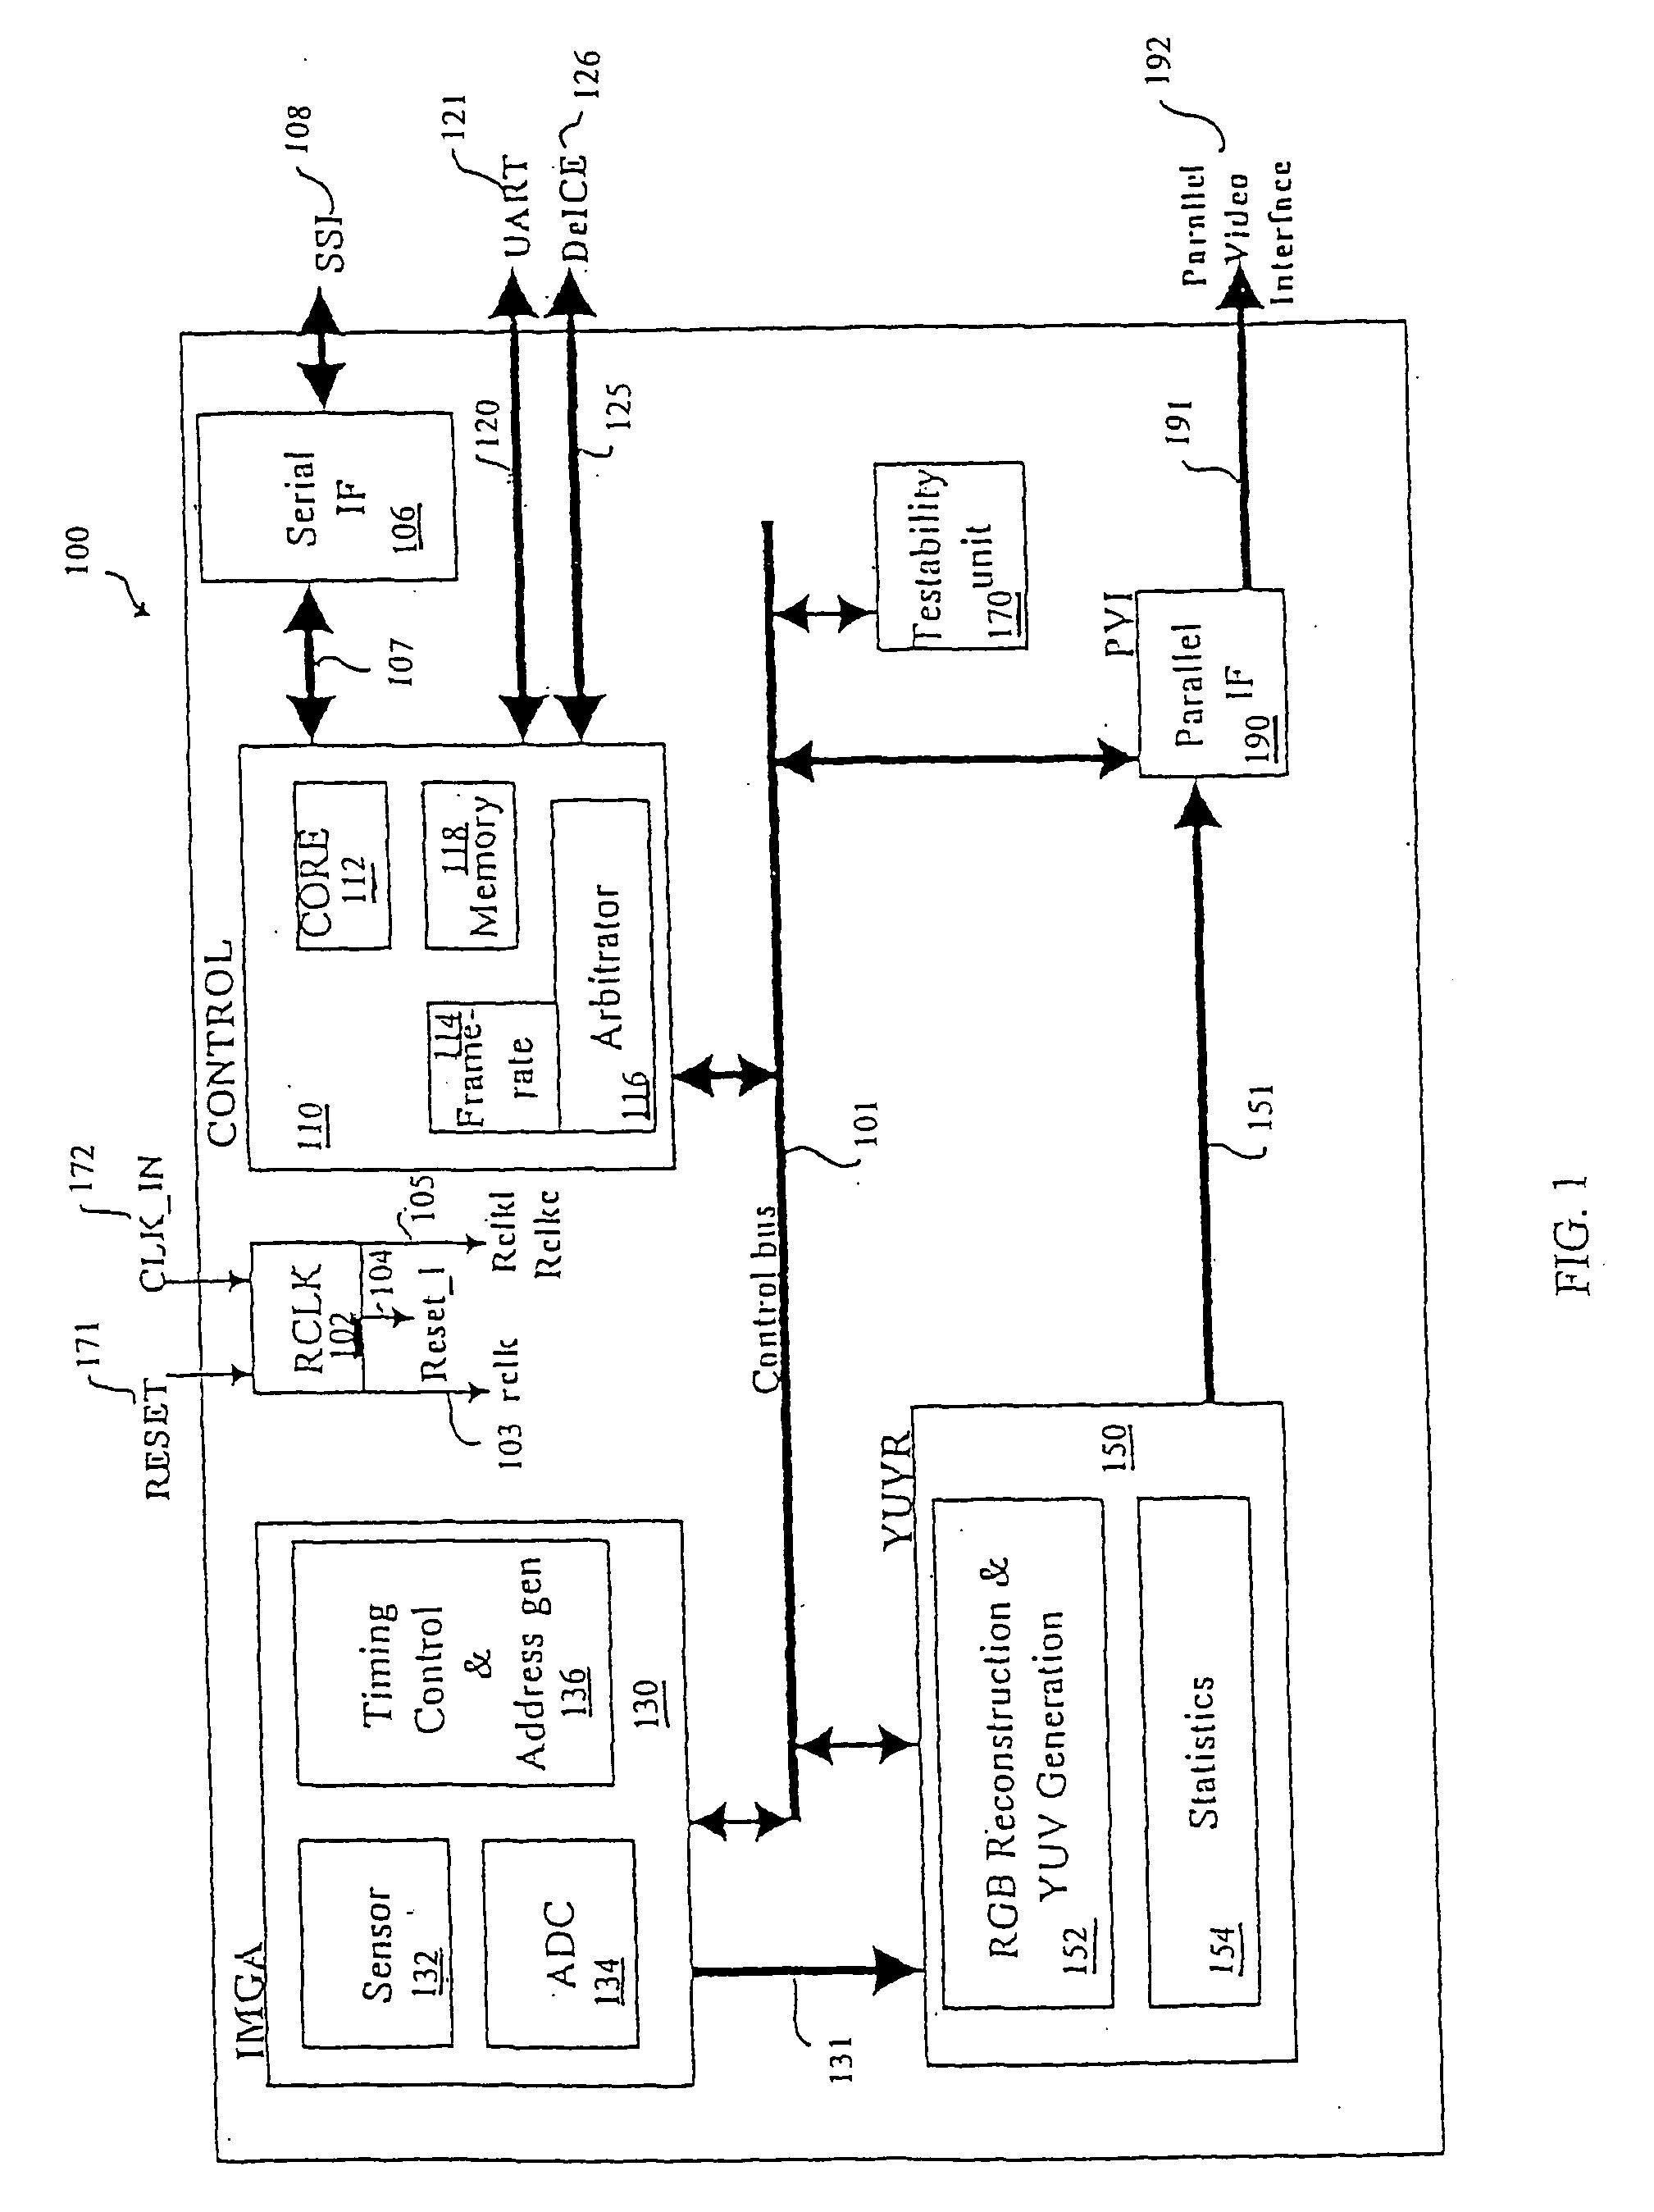 CMOS imager for cellular applications and methods of using such